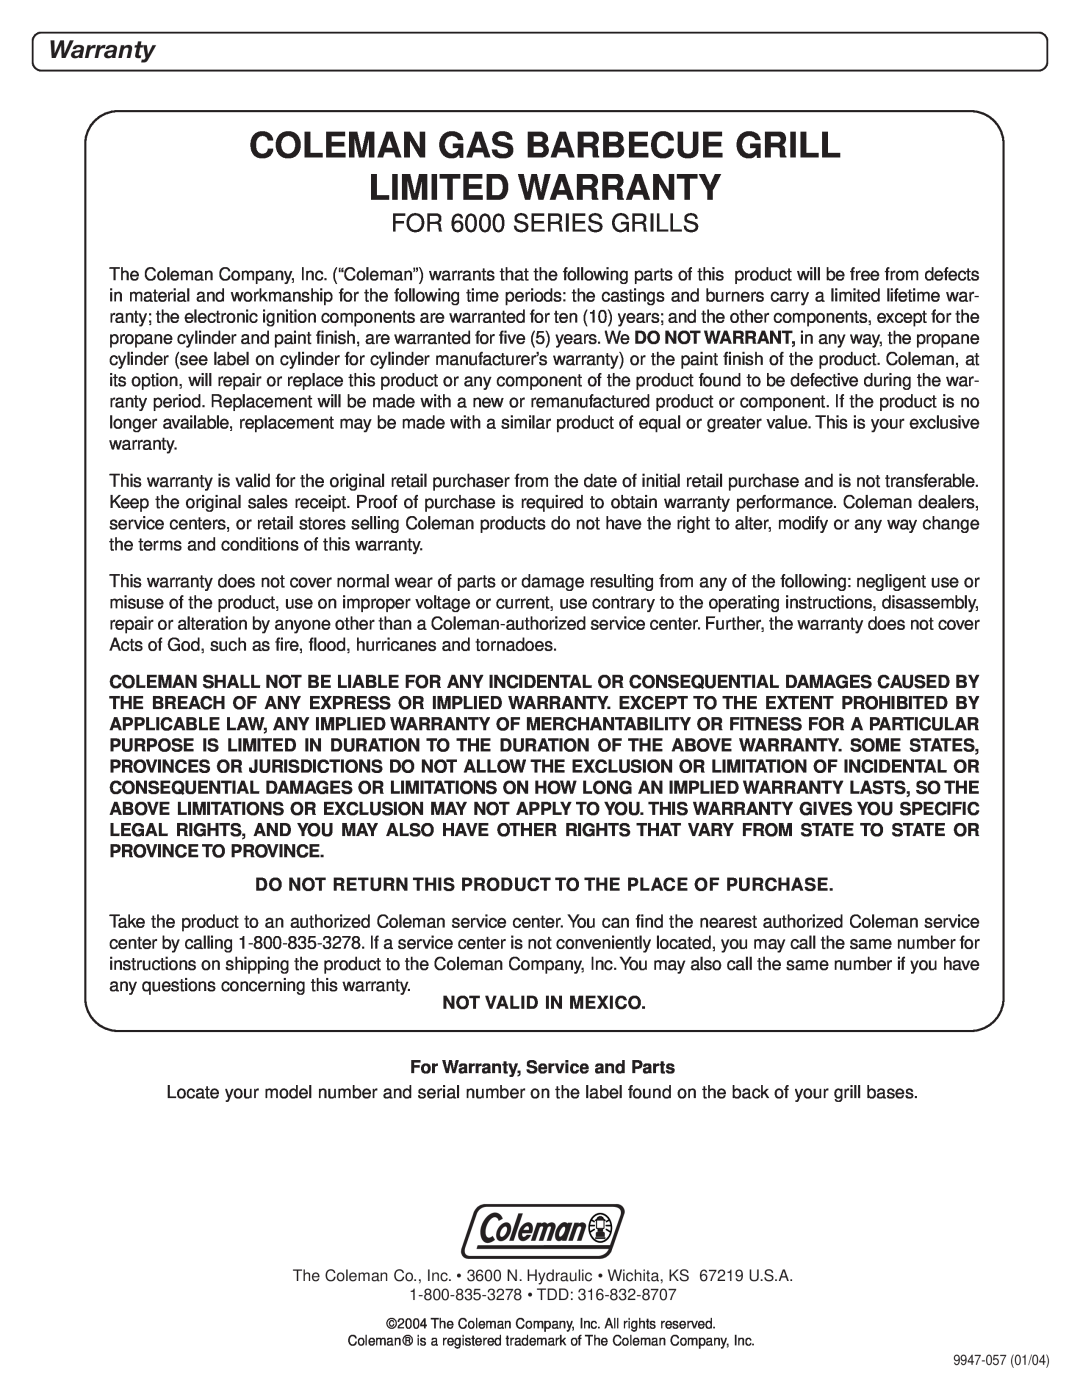 Coleman 9947A726 manual FOR 6000 SERIES GRILLS, Coleman Gas Barbecue Grill Limited Warranty 